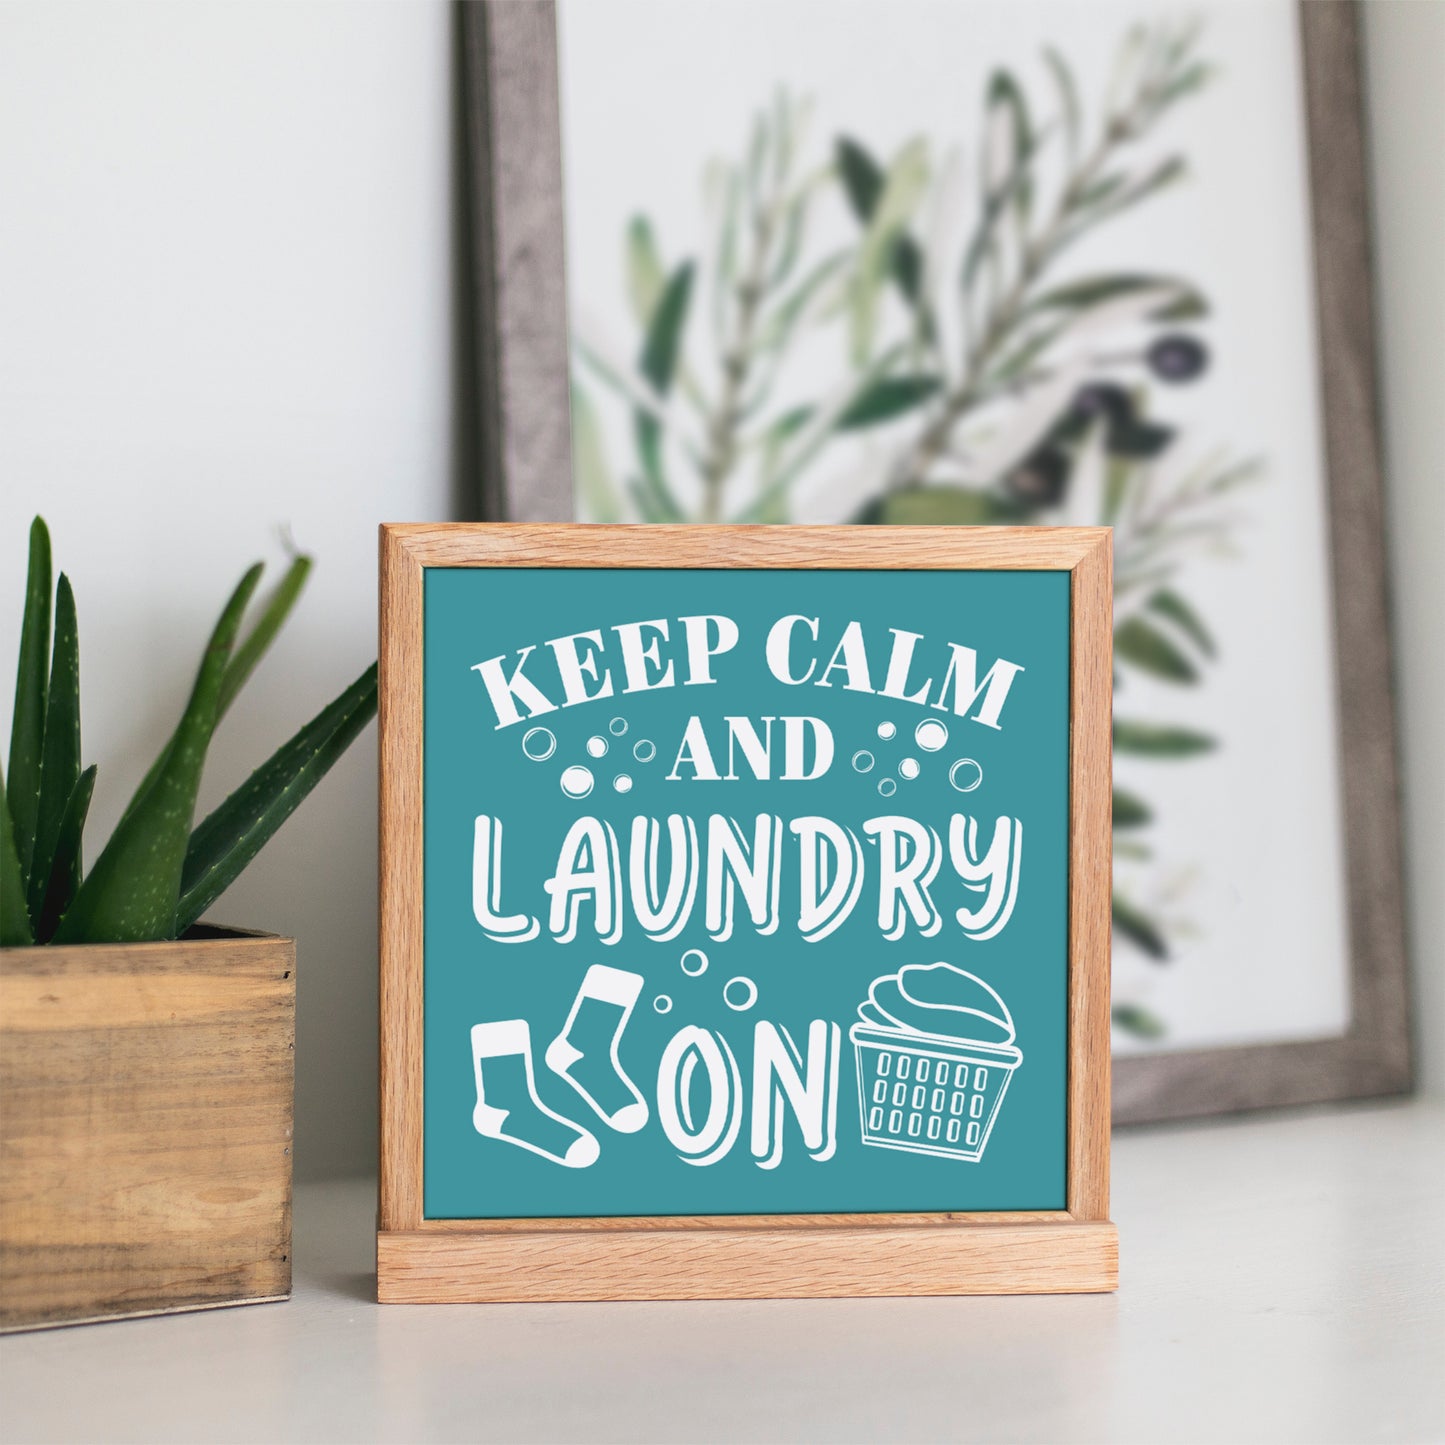 Keep Calm And Laundry On Square Print